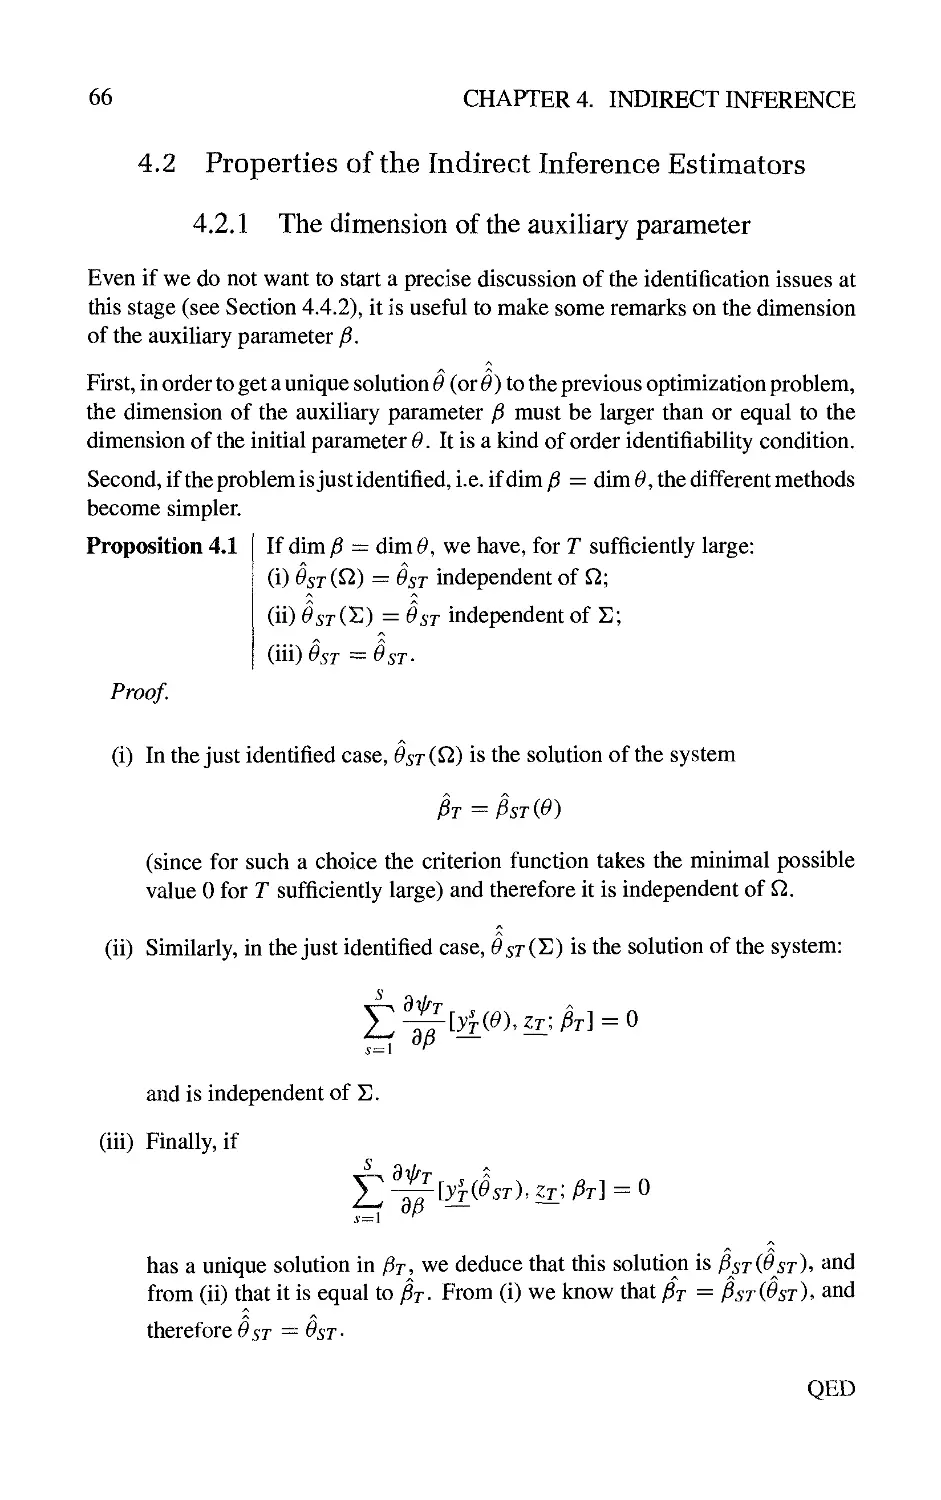 4.2 Properties of the Indirect Inference Estimators